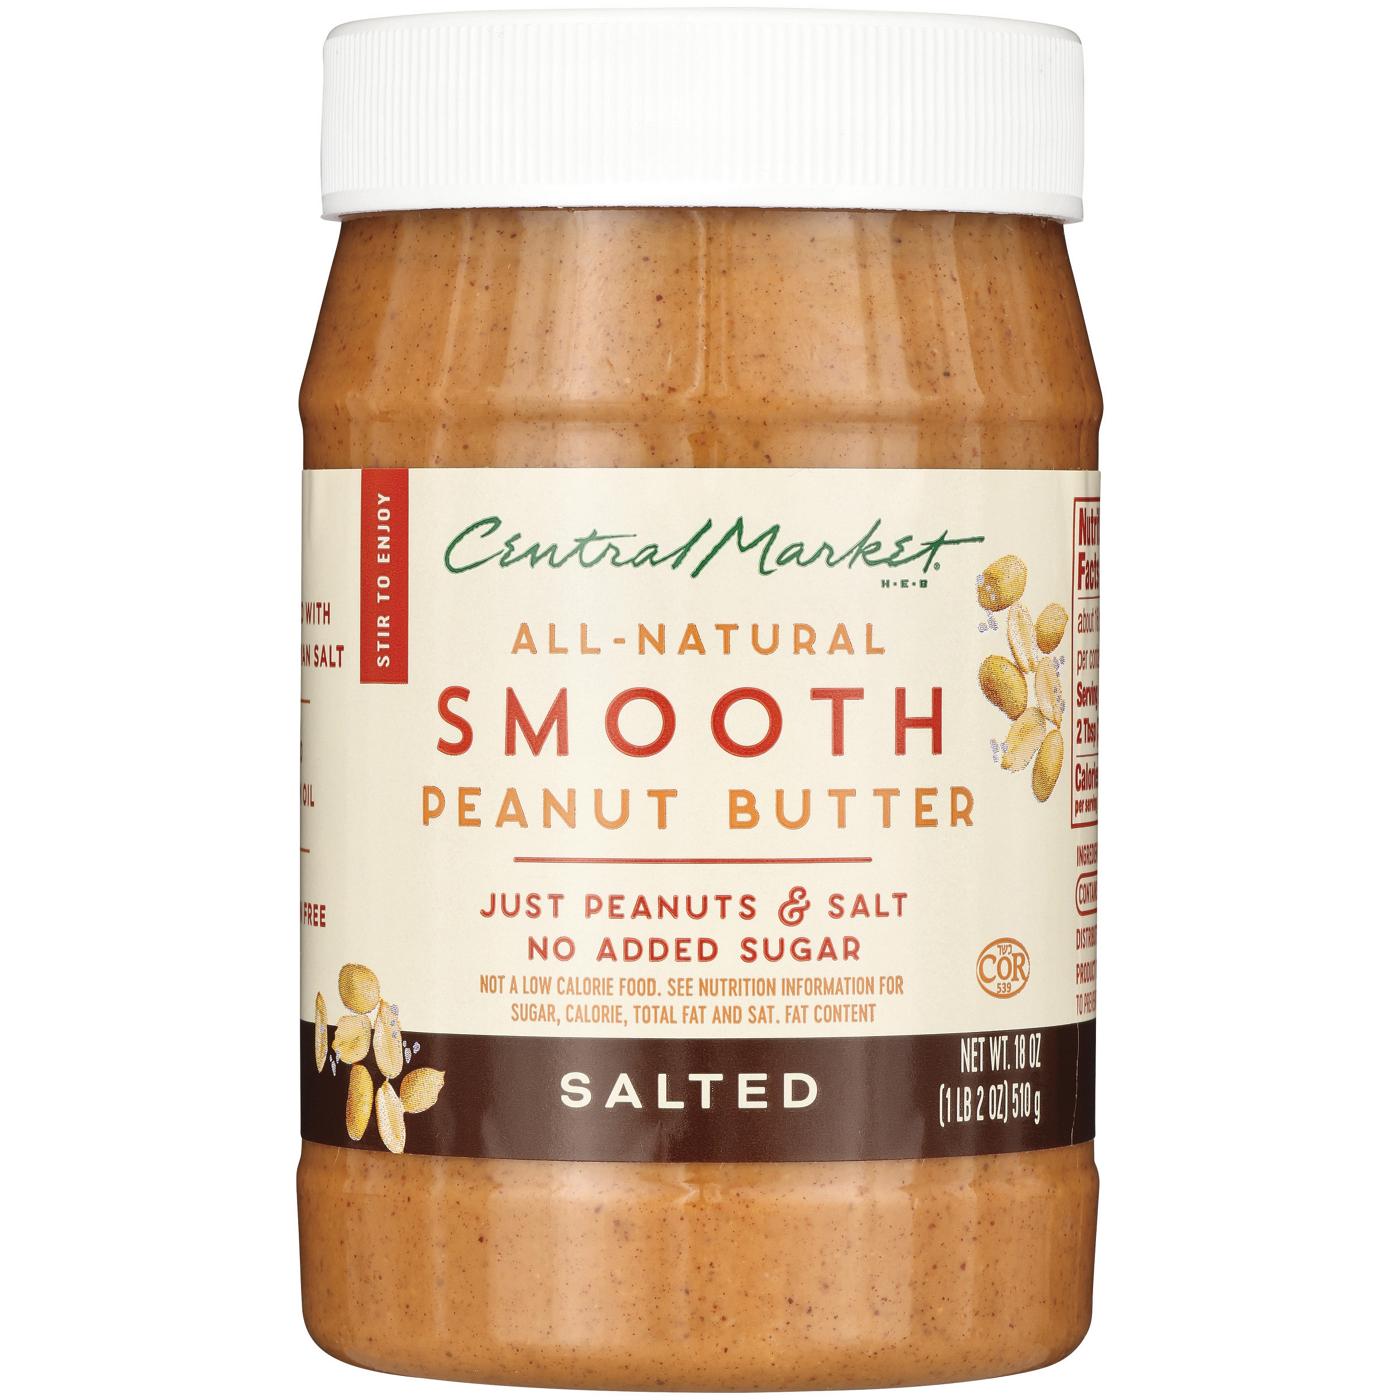 Central Market All-Natural Smooth Peanut Butter - Salted; image 1 of 2